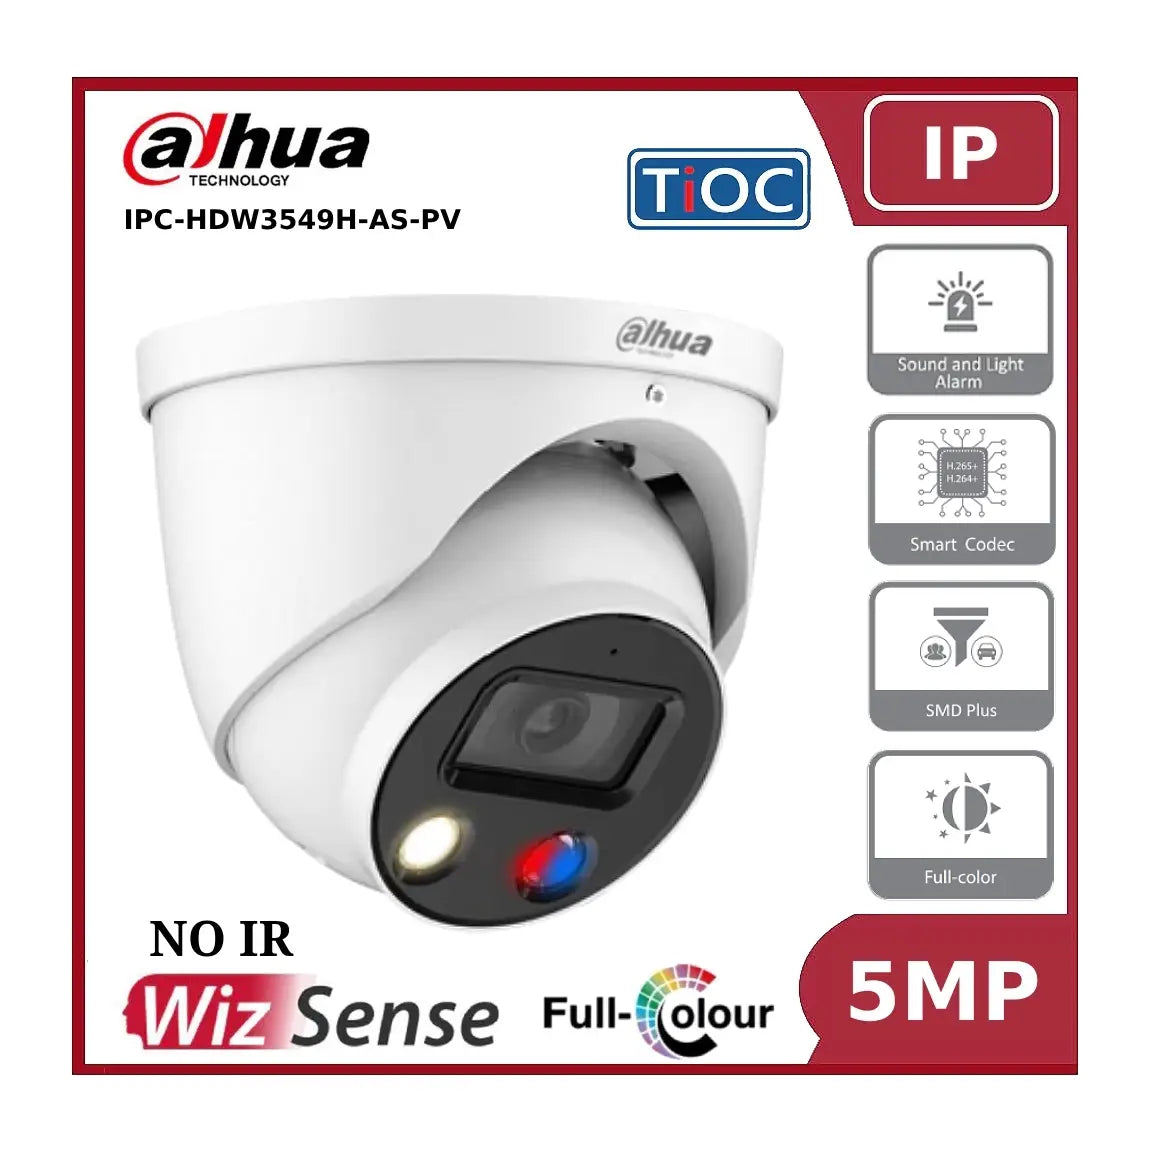 5MP Dahua IPC-HDW3549H-AS-PV WizSense, TiOC IP67 2.8mm Fixed Lens, 30M Active Deterrence IP Turret Camera, White